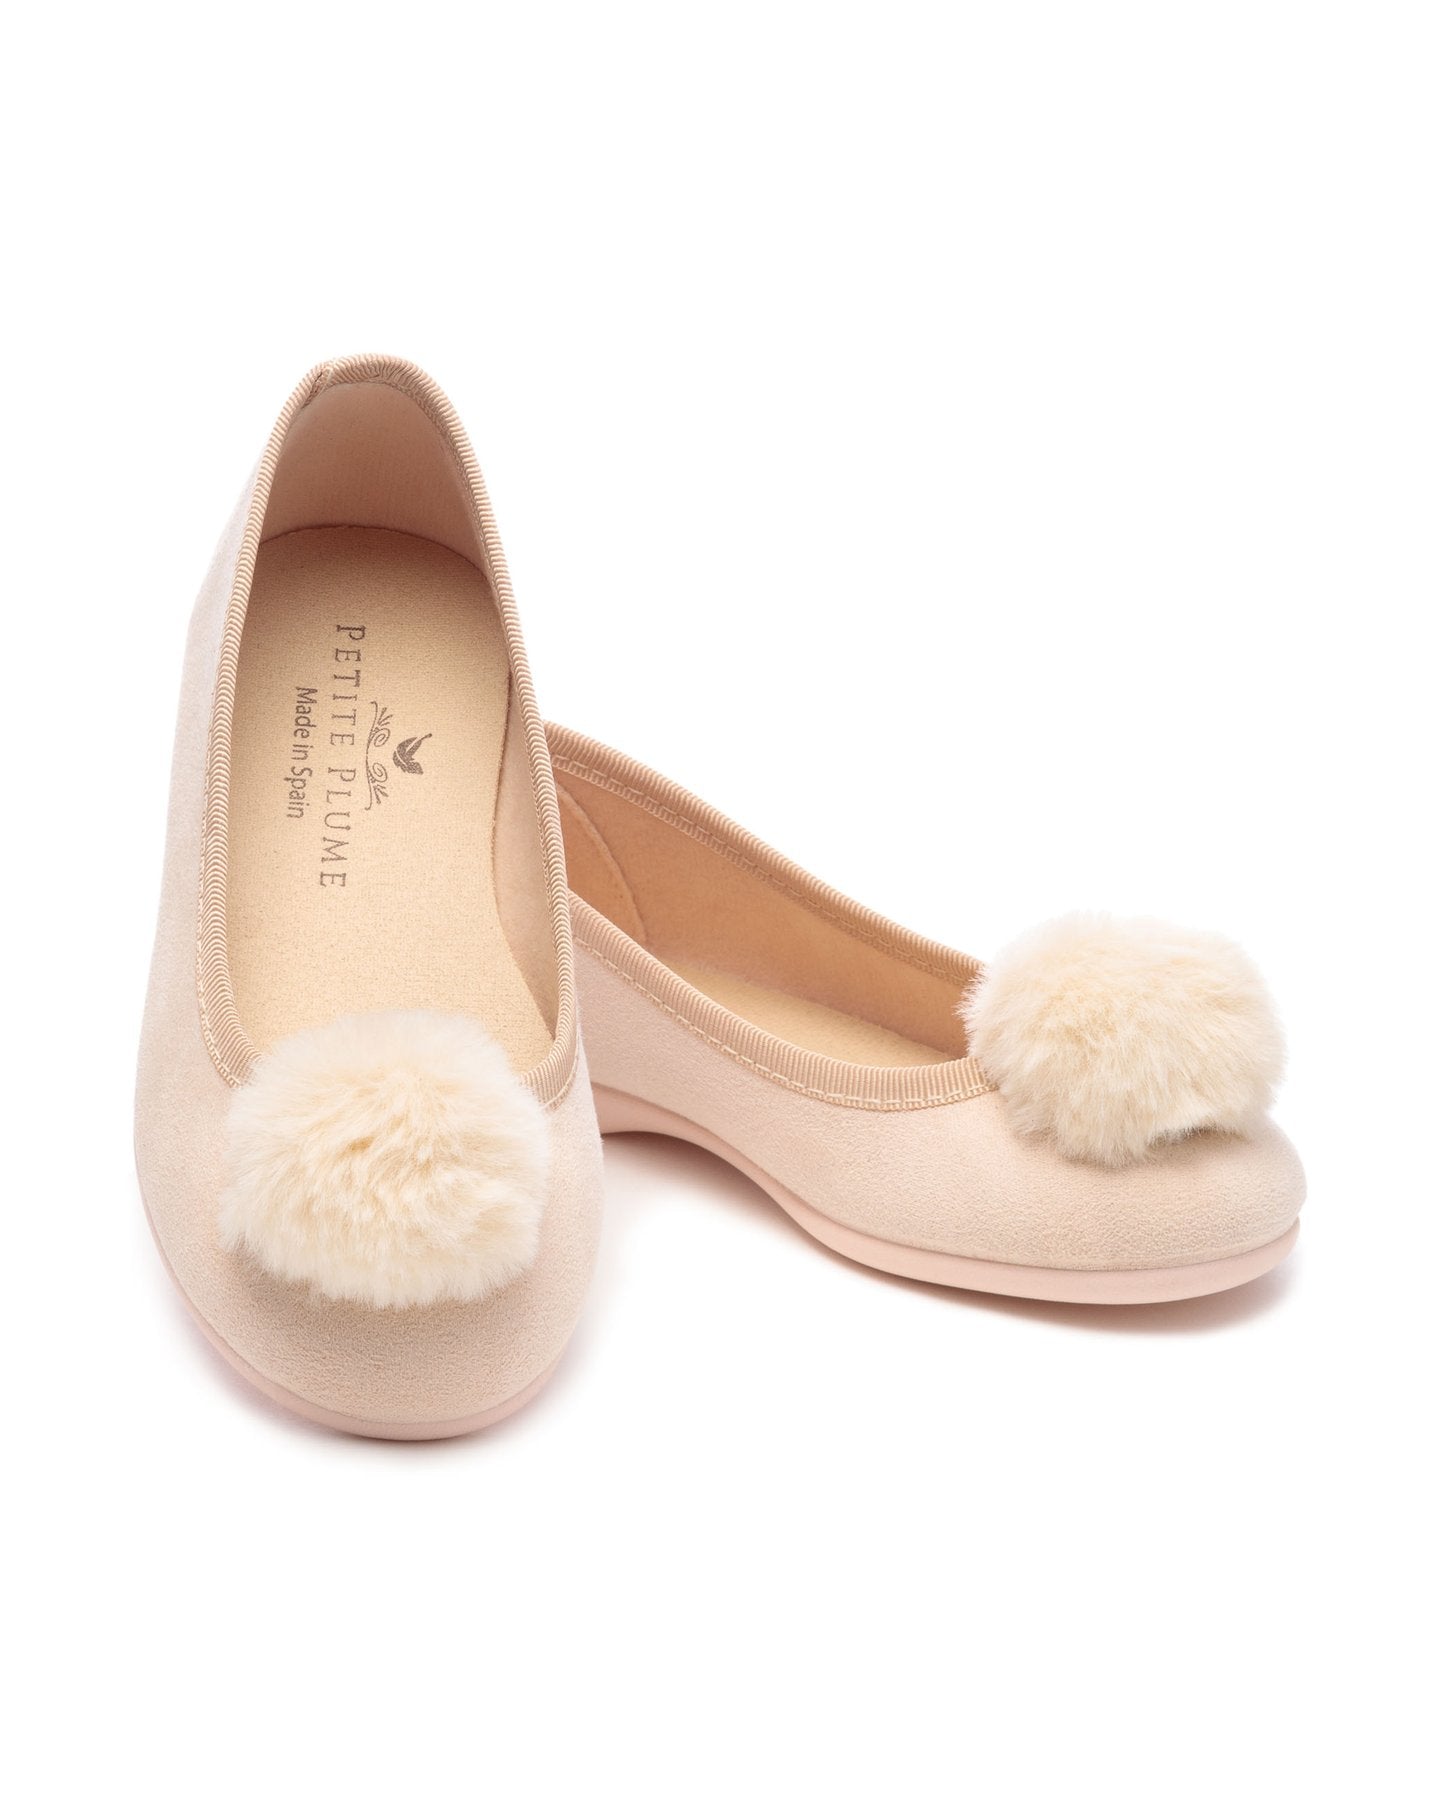 The Juliette in Peach Suede with Pom